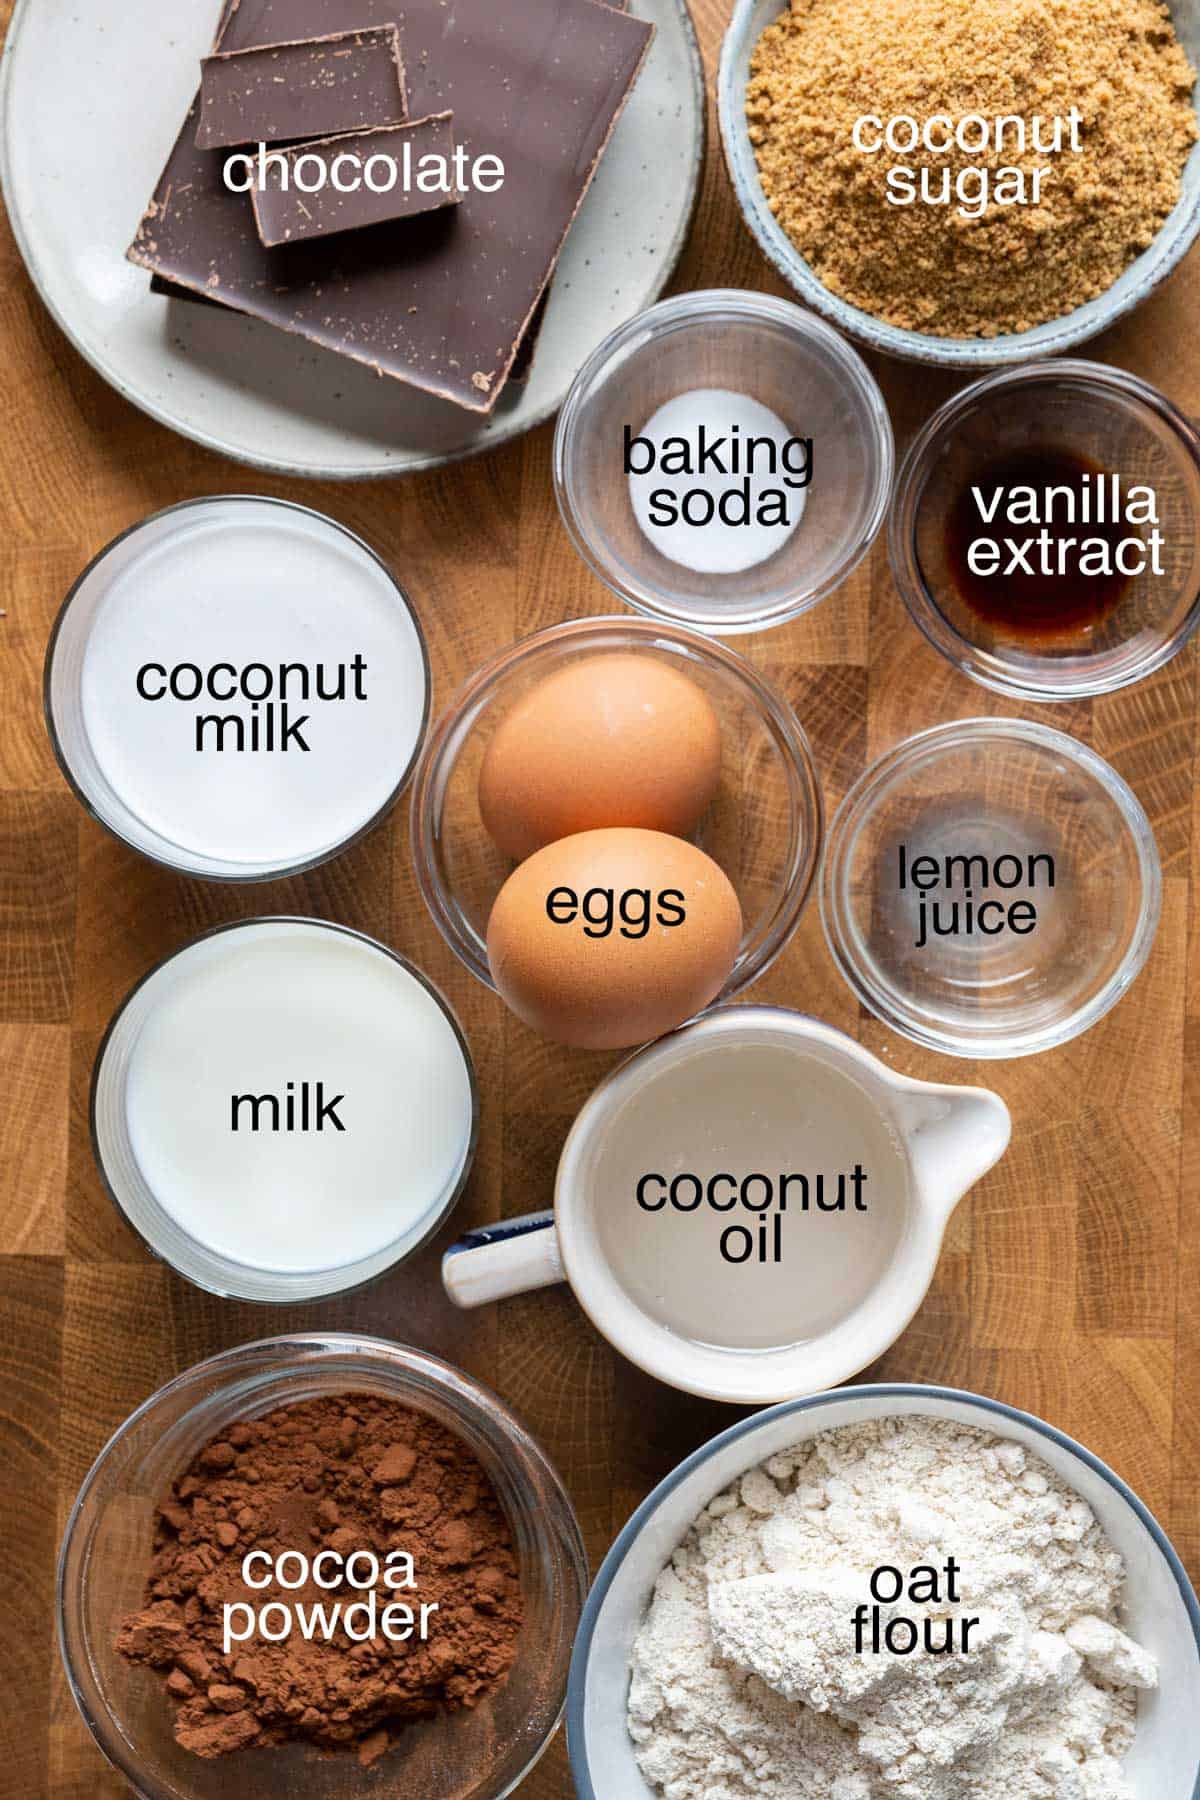 Ingredients to make healthy chocolate cupcakes.